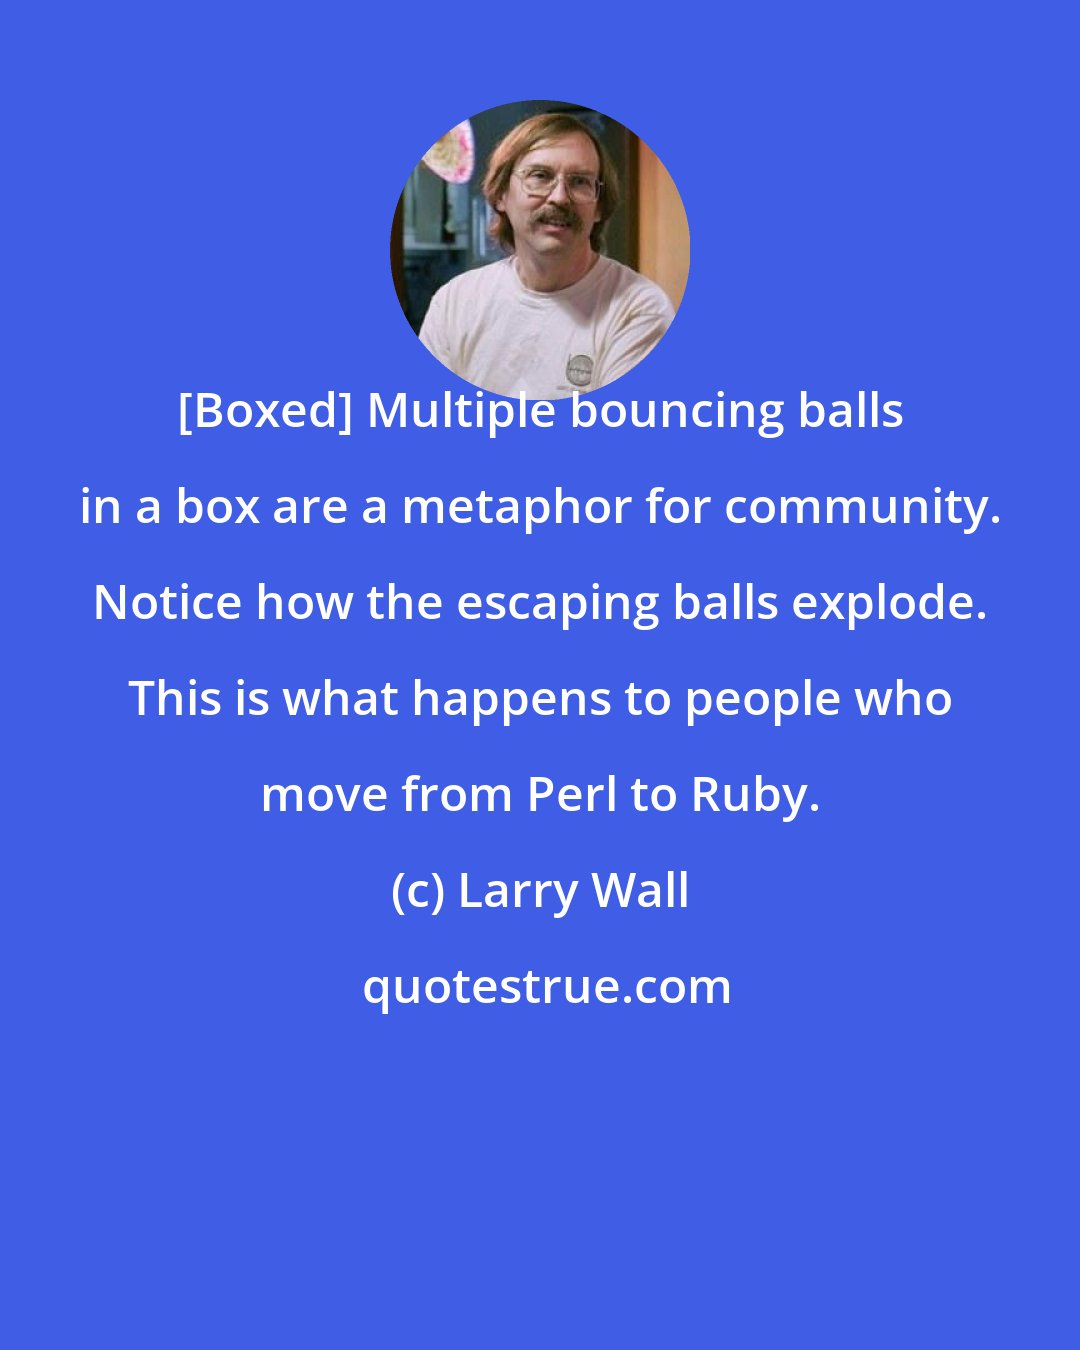 Larry Wall: [Boxed] Multiple bouncing balls in a box are a metaphor for community. Notice how the escaping balls explode. This is what happens to people who move from Perl to Ruby.